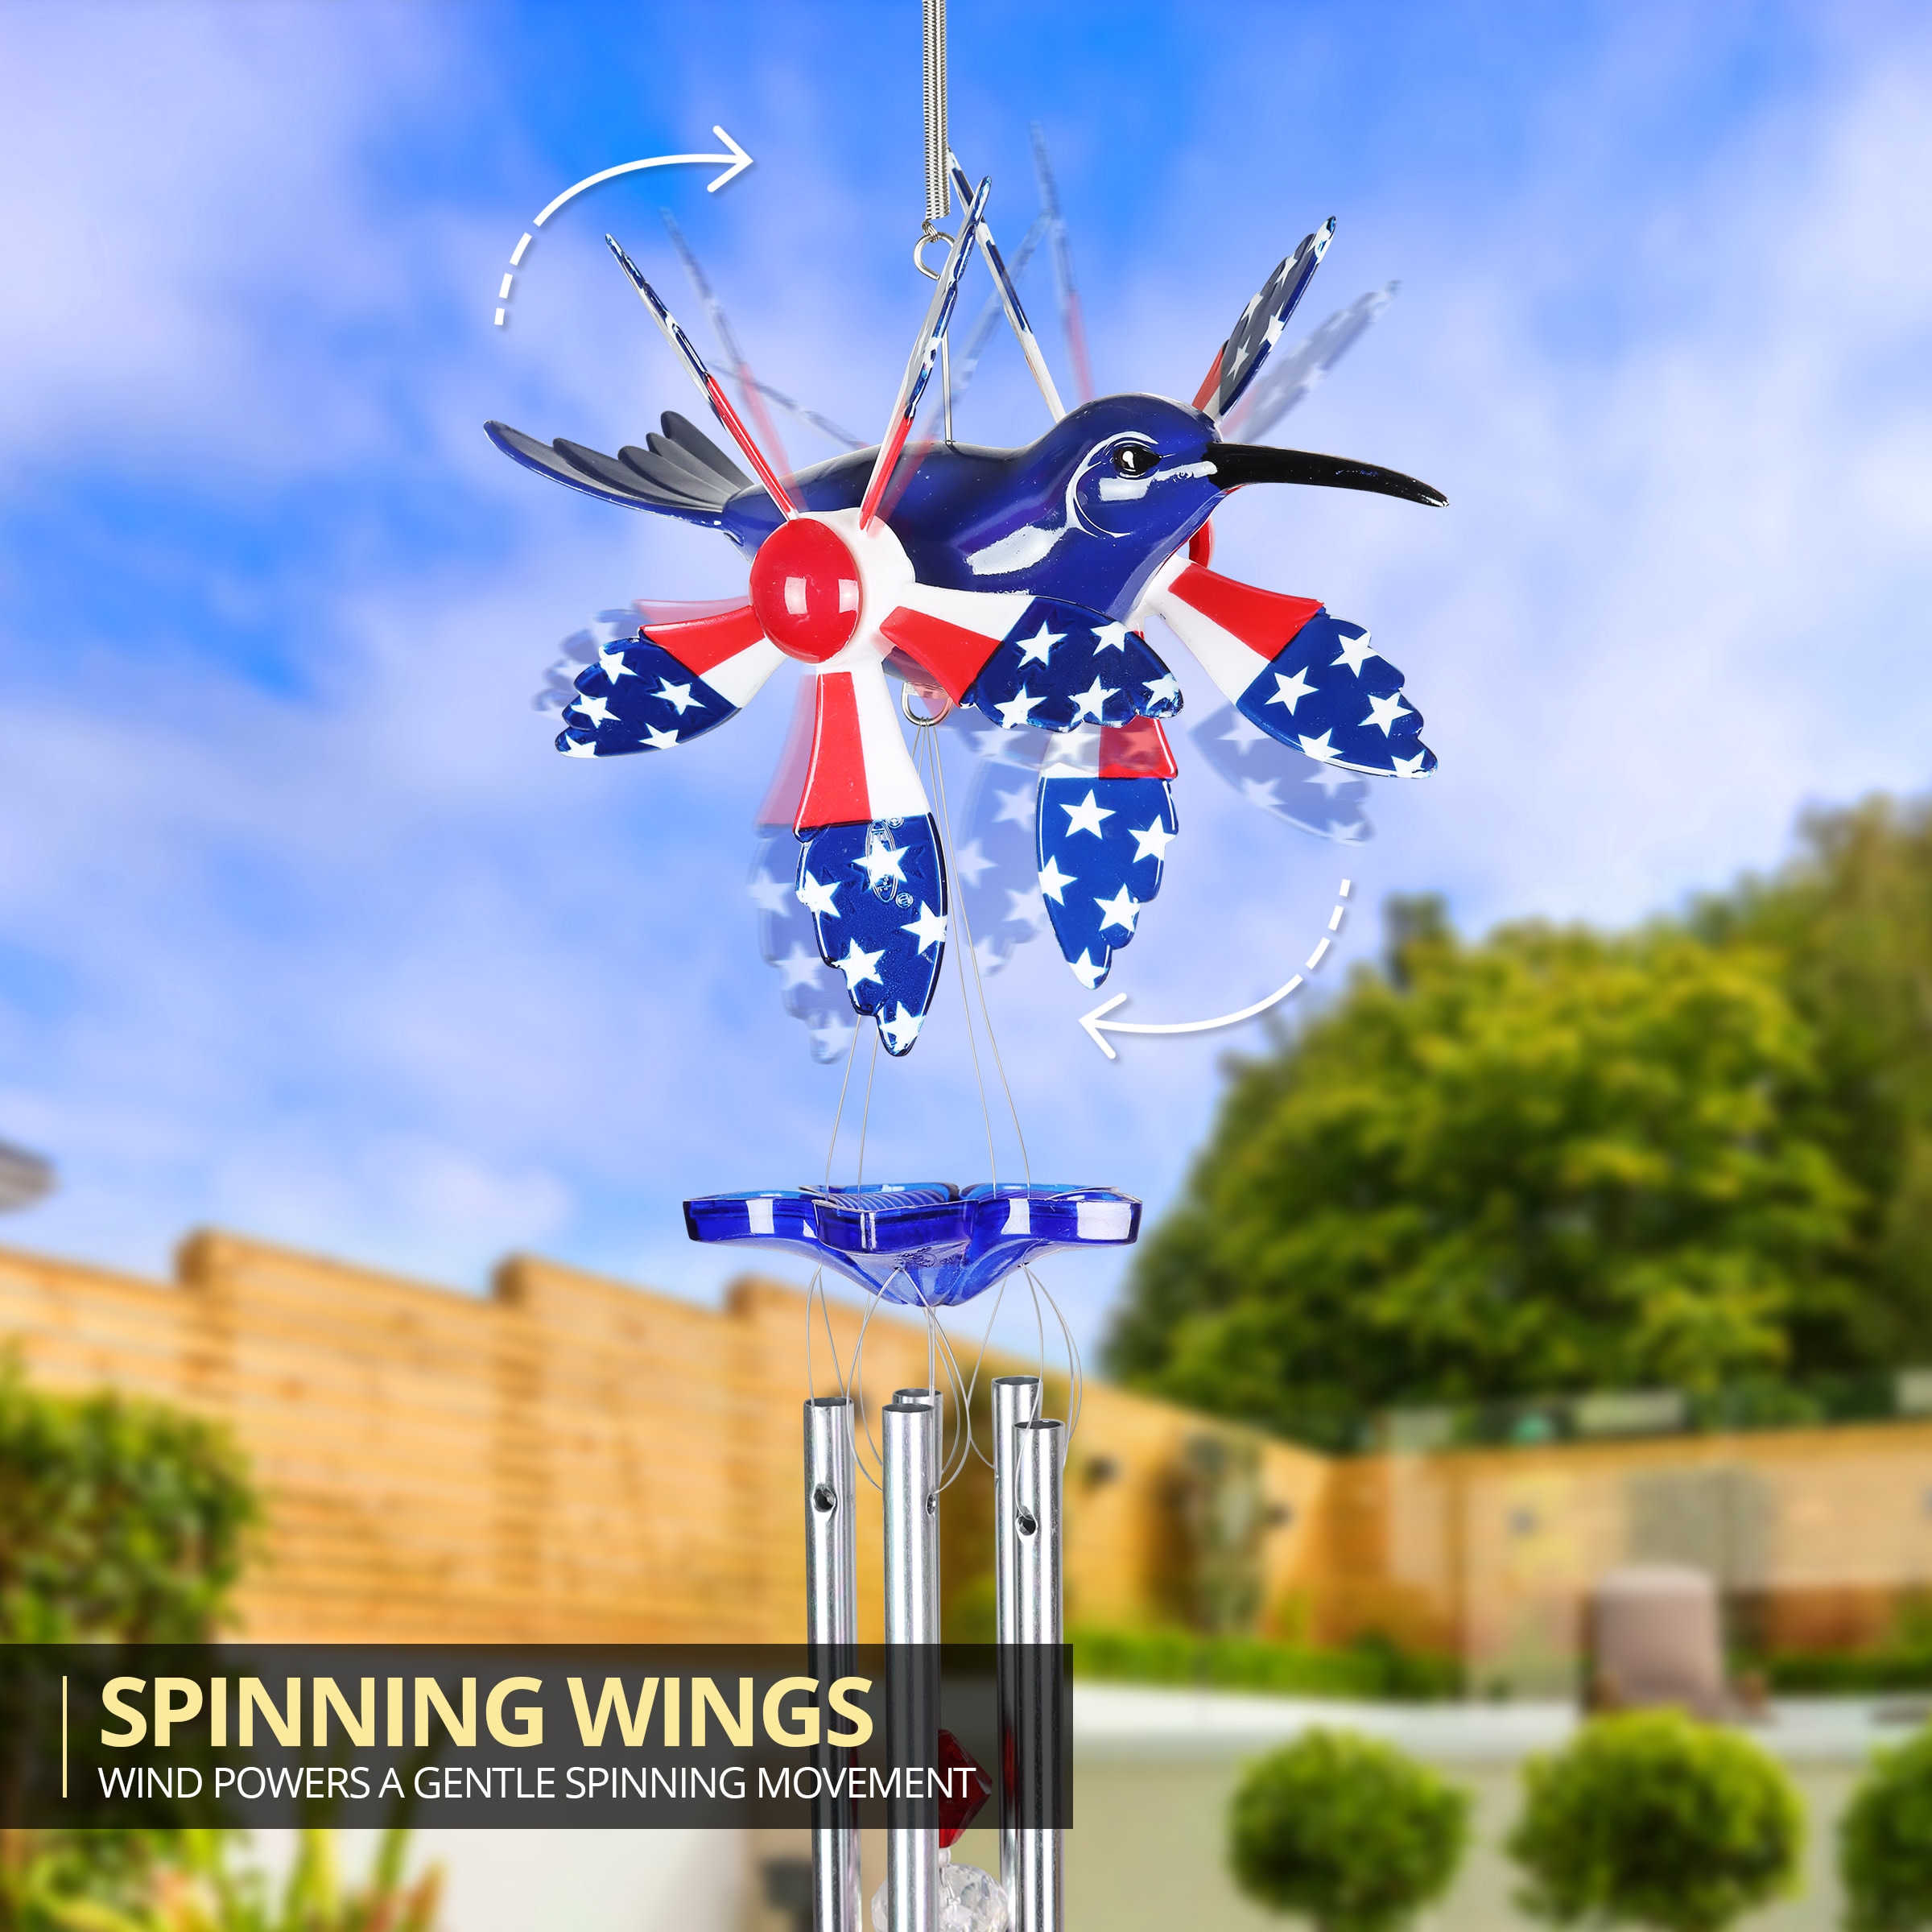 Wholesale Hummingbird Listen to the Wind Memorial Wind Chime for